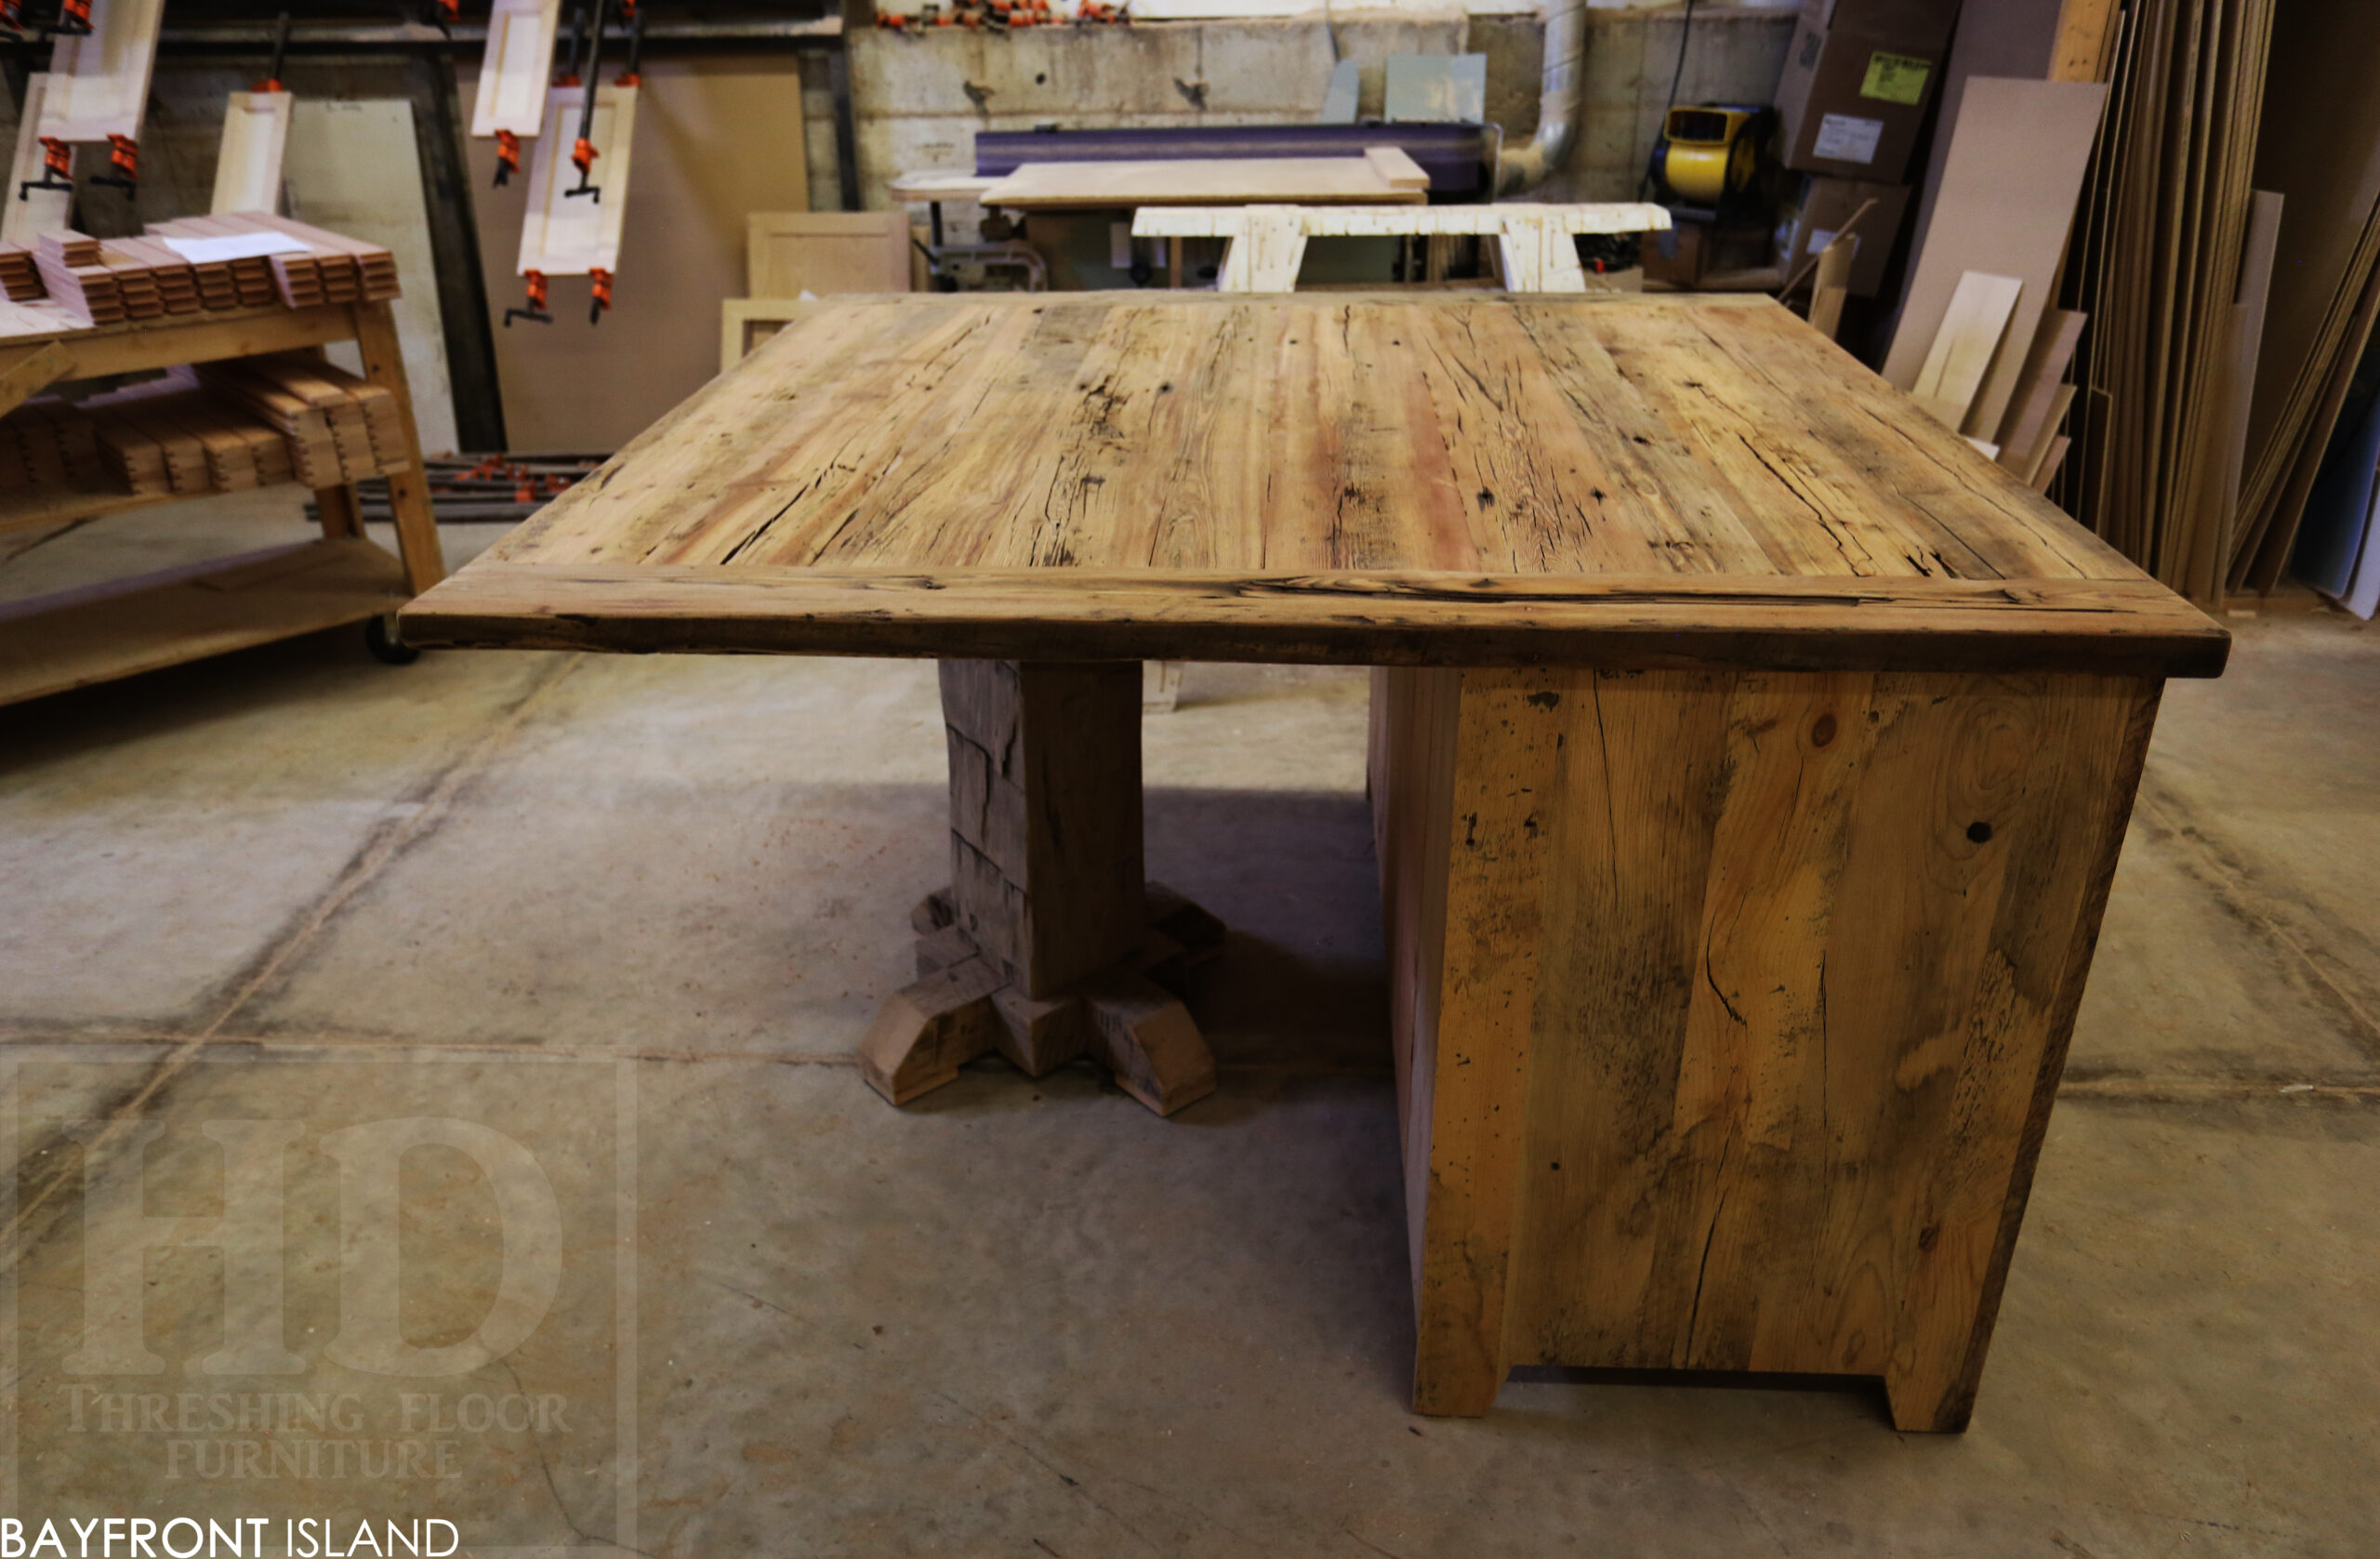 5’ x 5’ Ontario Barnwood Island - 36” height – Reclaimed Hemlock Threshing Floor & Grainery Board Construction – Mission Cast Brass Lee Valley Hardware – Original edges & distressing maintained – Pedestal Post to Support Overhang – www.table.ca